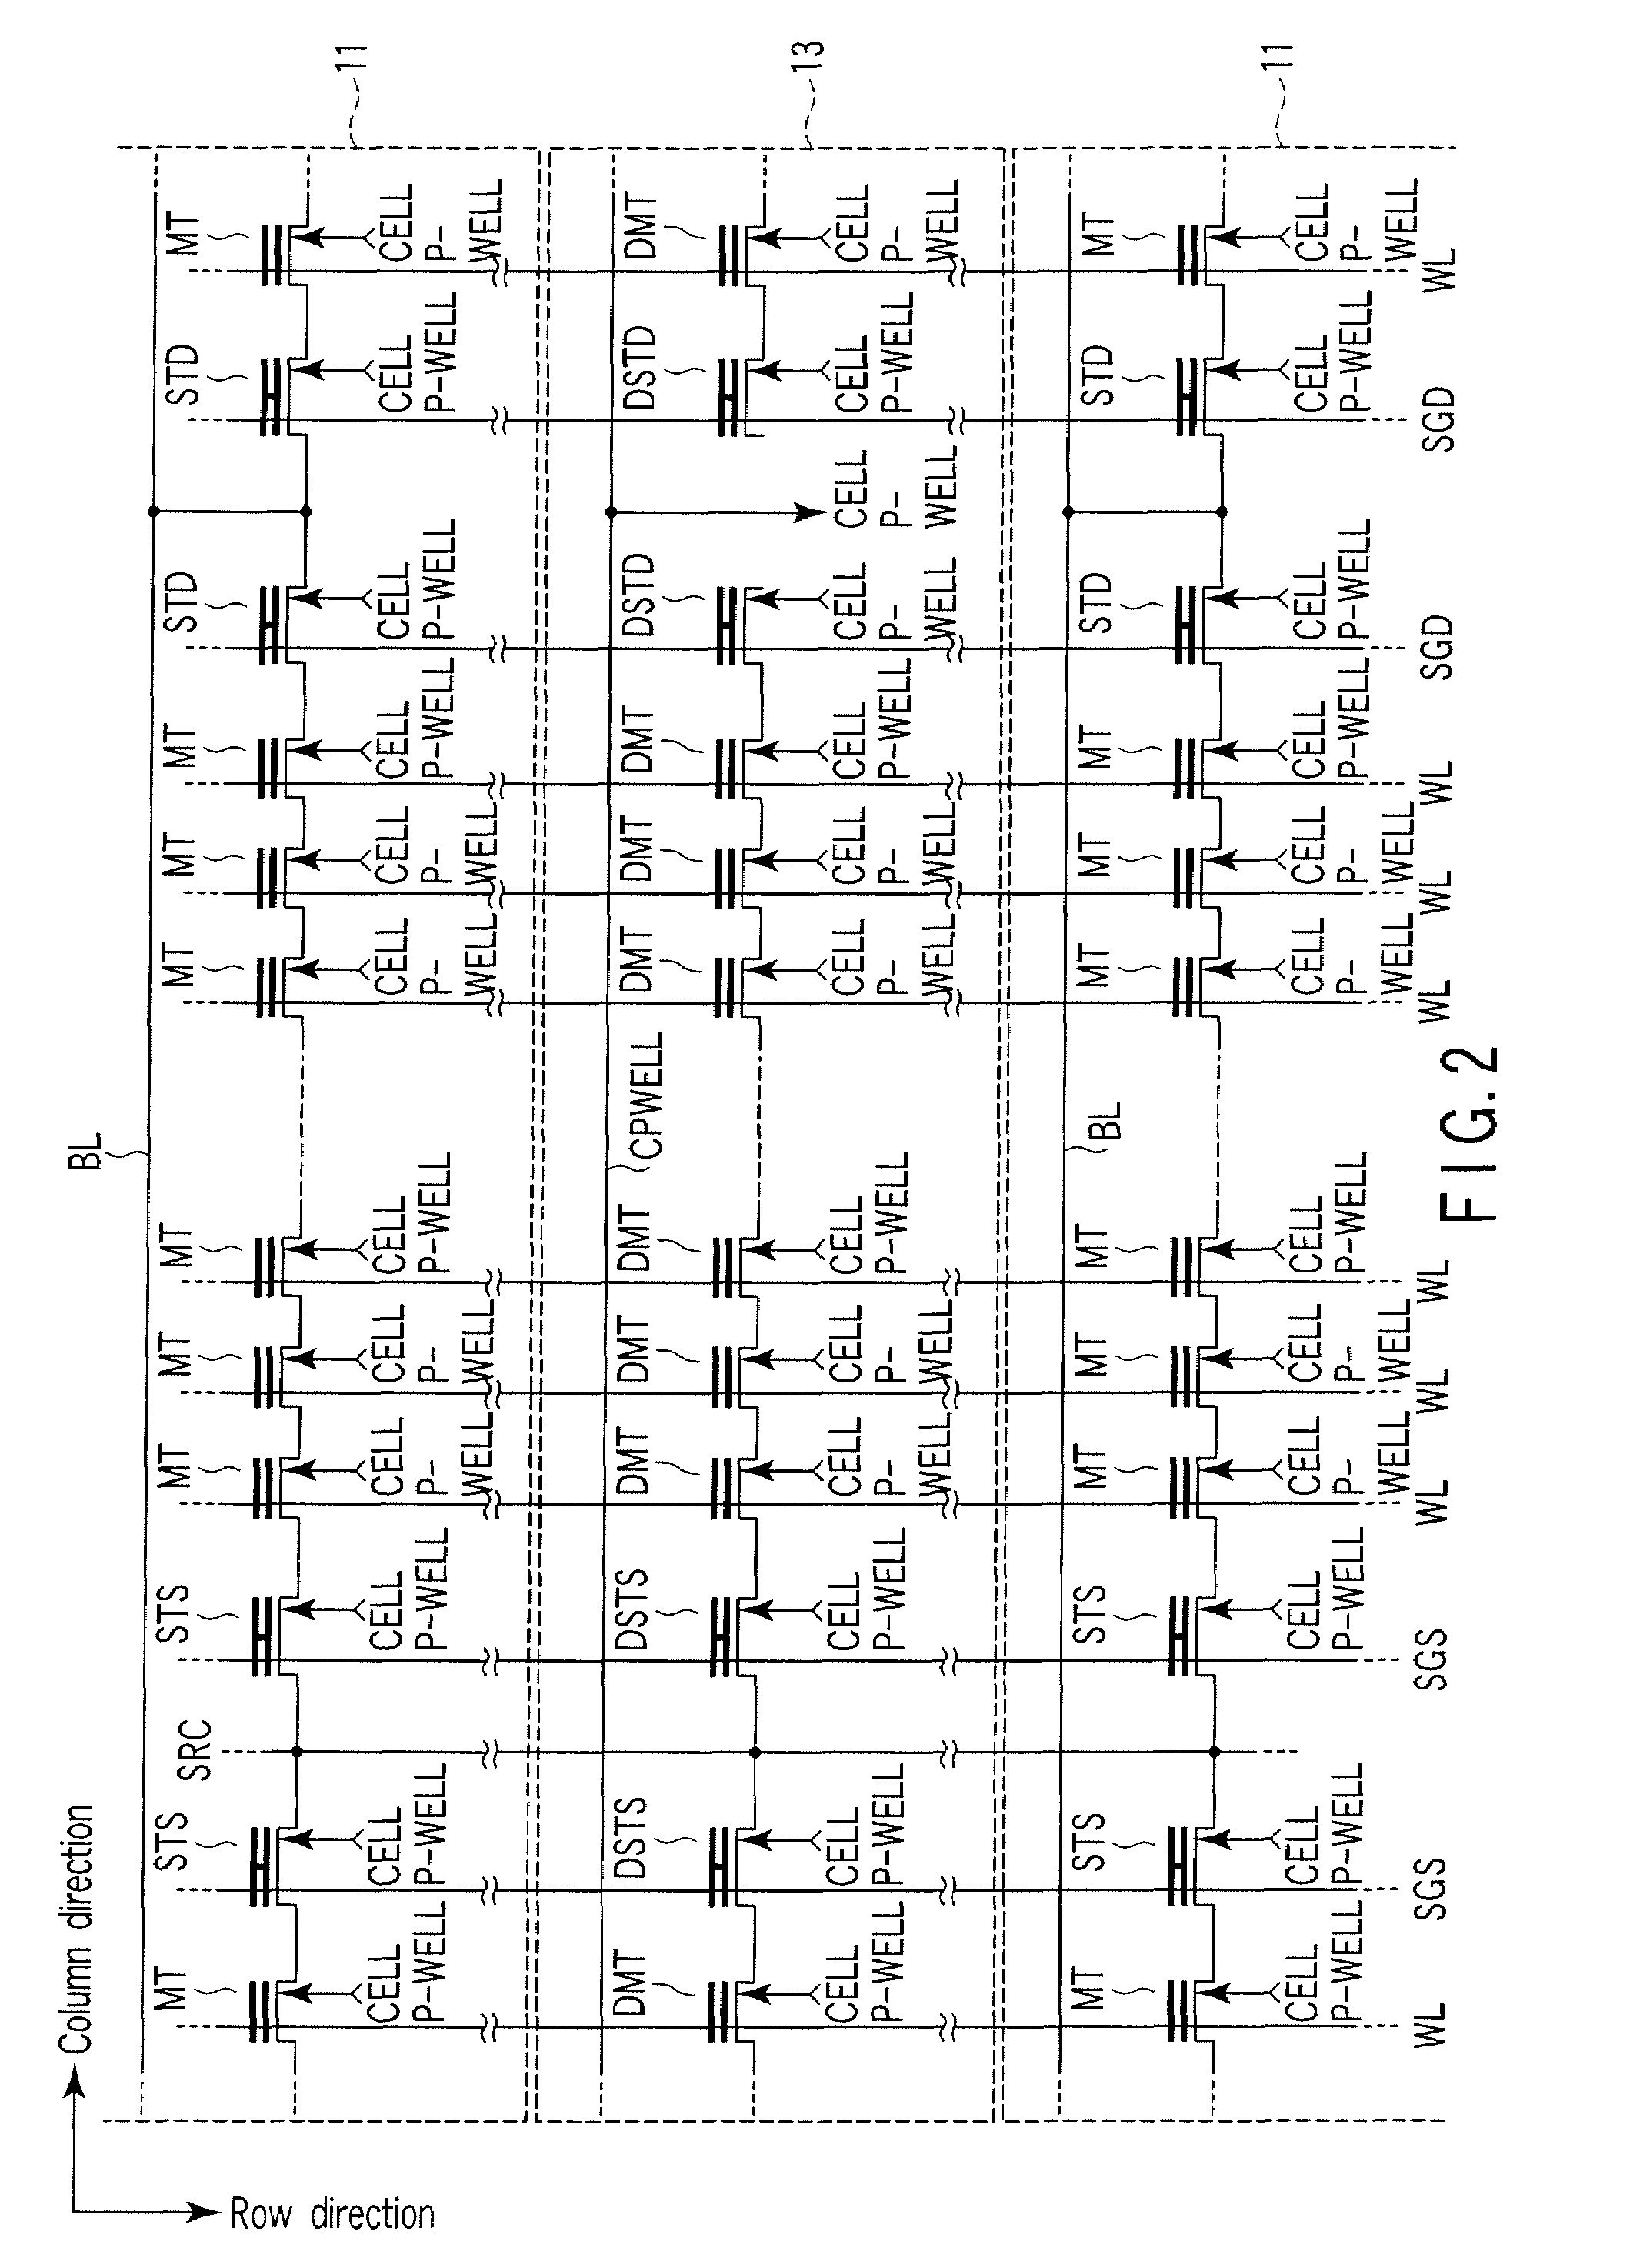 EEPROM array with well contacts